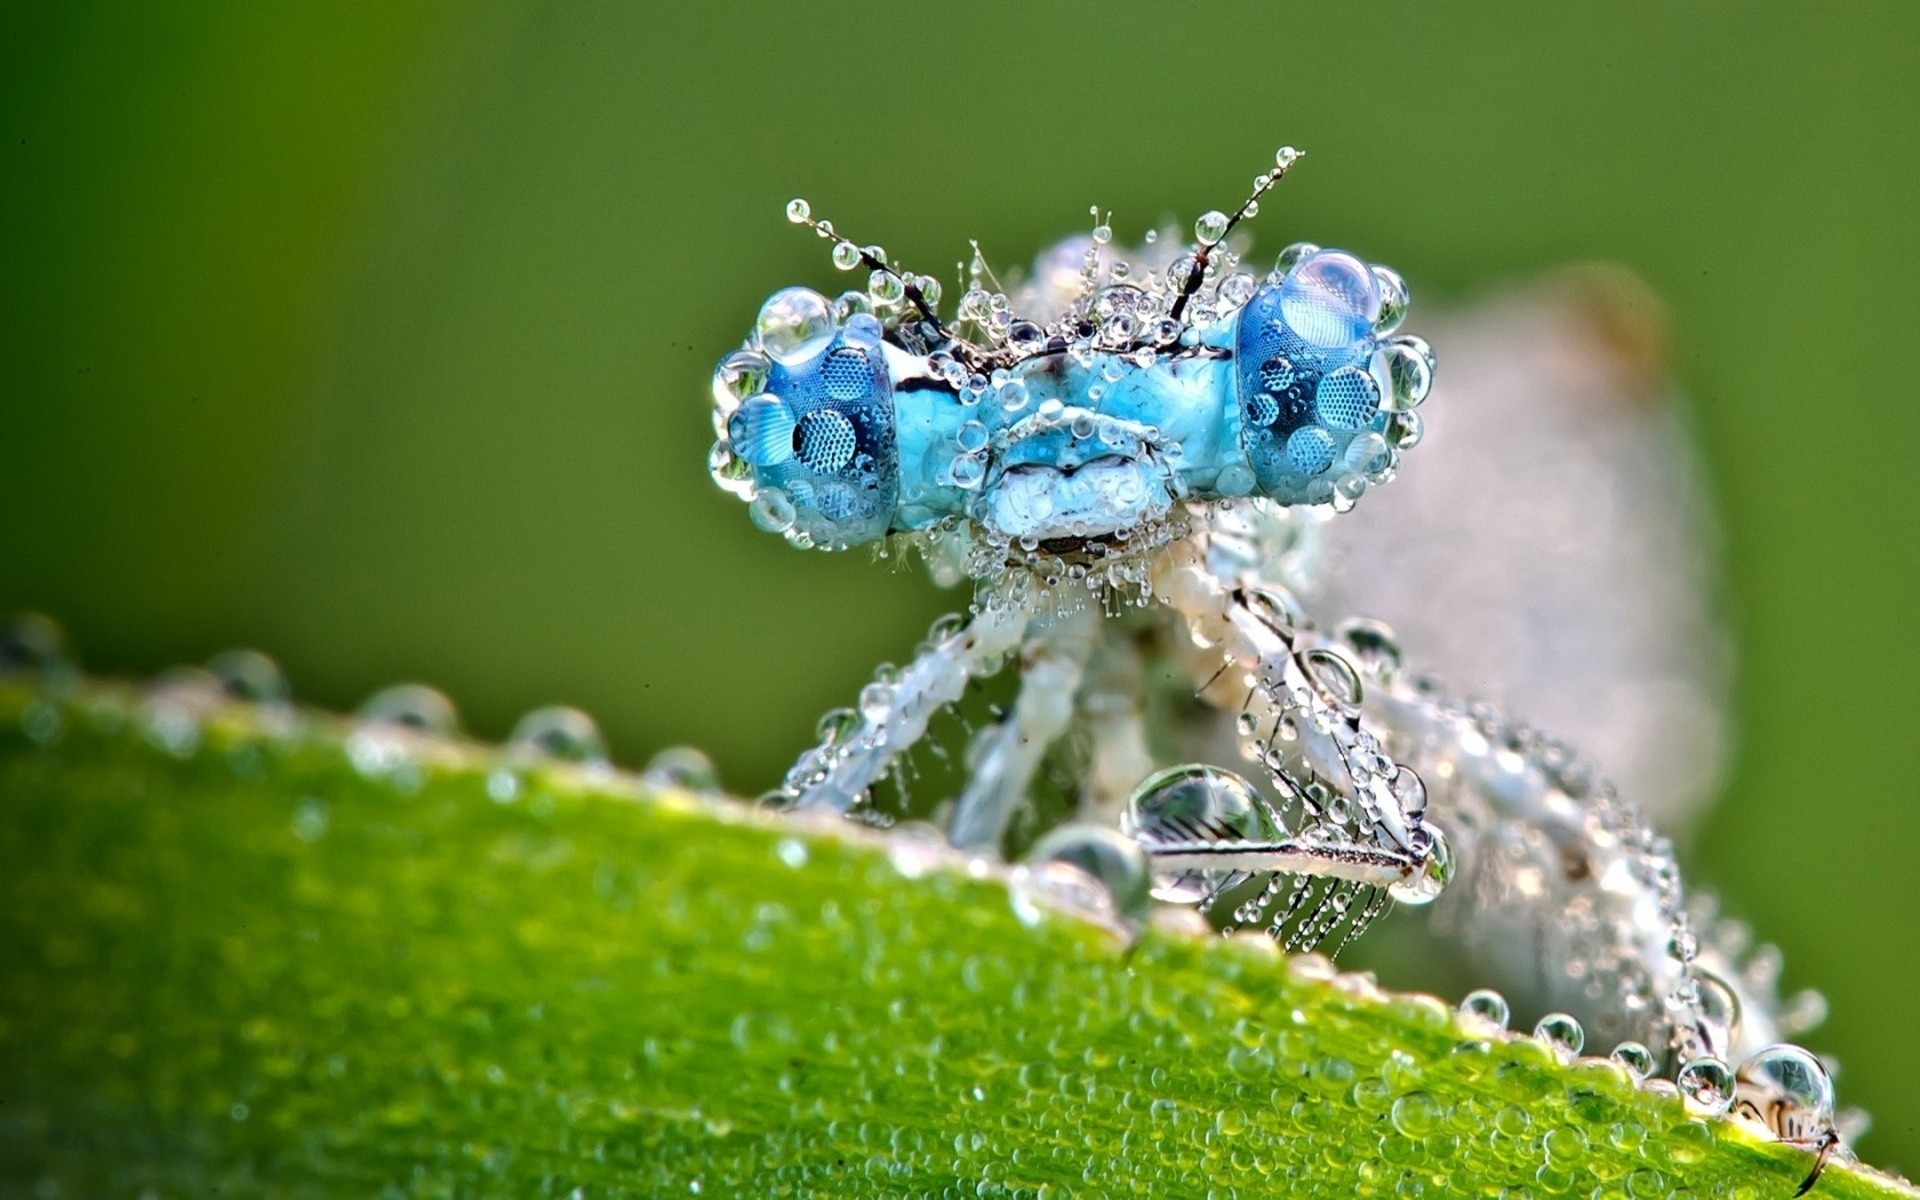 insects, Dragonflies, Macro, Drops, Eyes, Water, Leaves, Close up Wallpaper